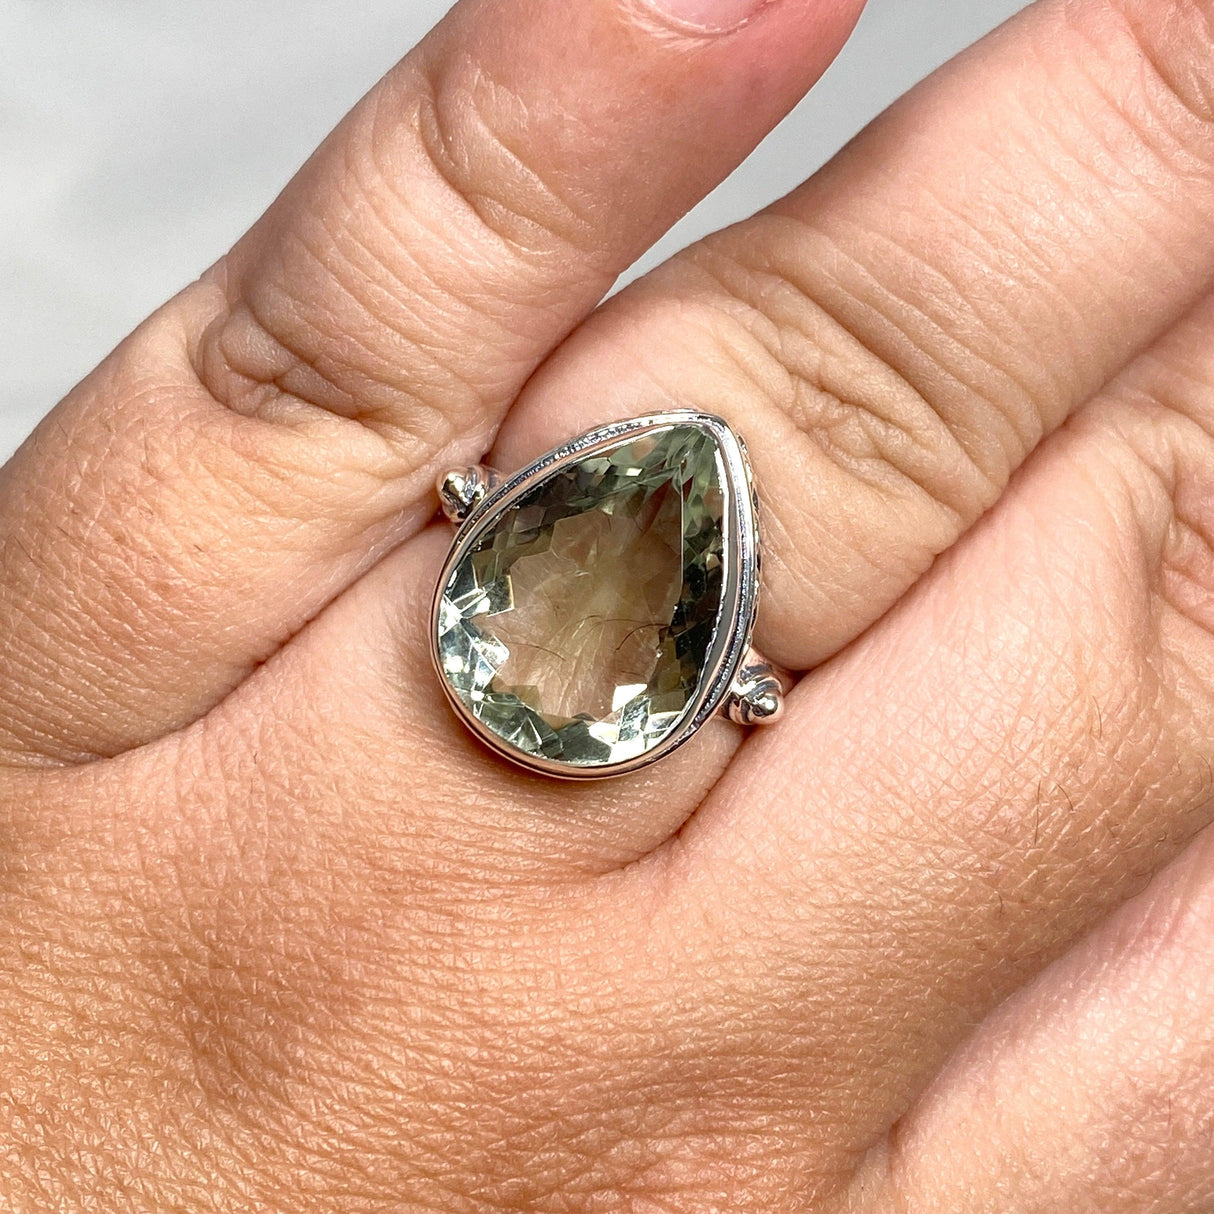 Prasiolite Faceted Teardrop Ring in a Decorative Setting R3817 - Nature's Magick